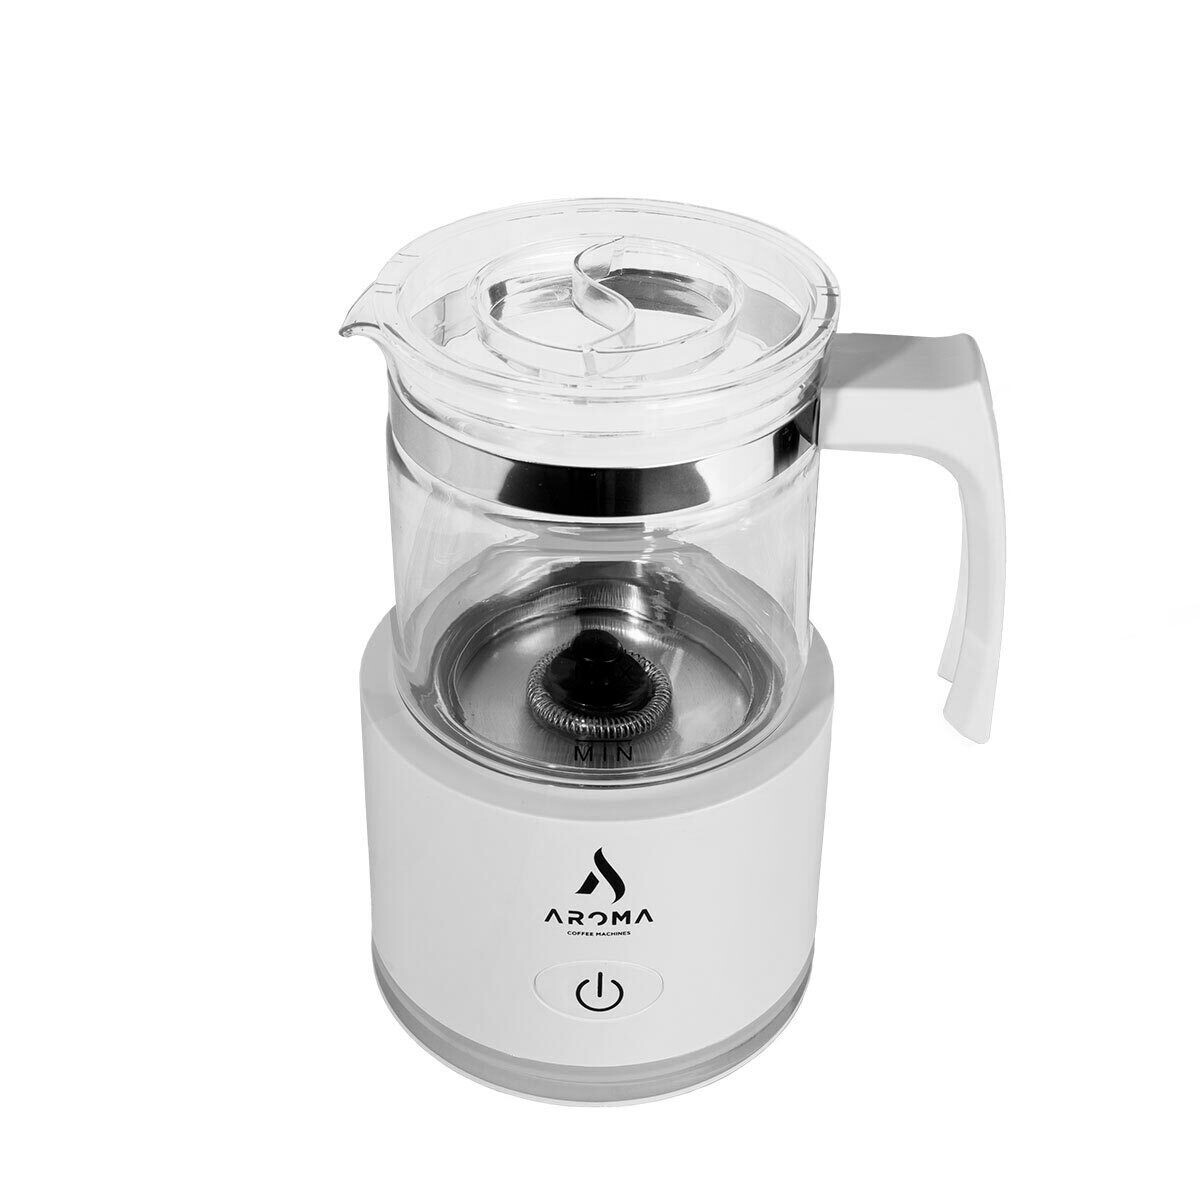 Aroma Milk Frother